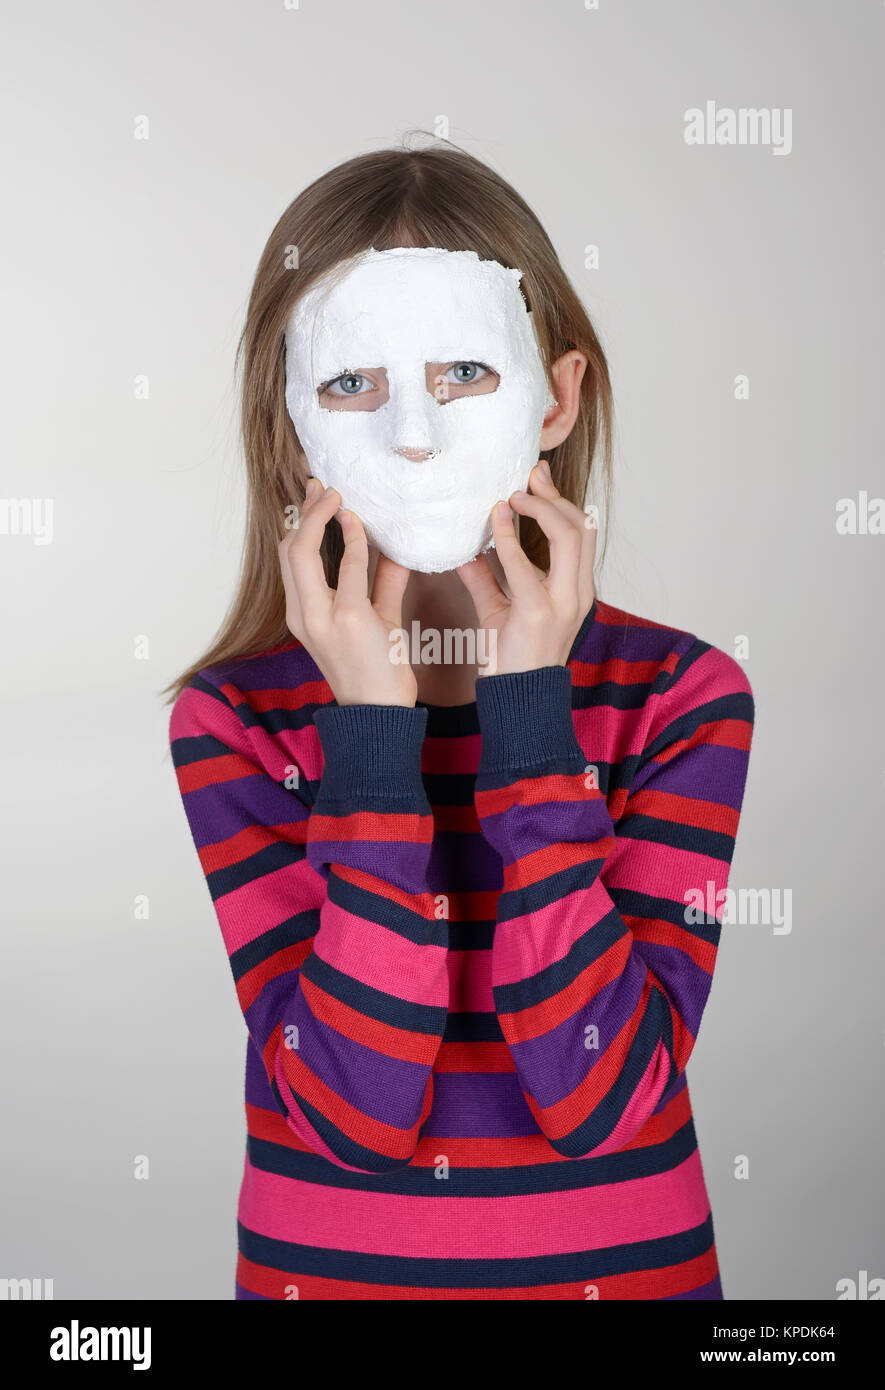 Â little girl with mask Stock Photo